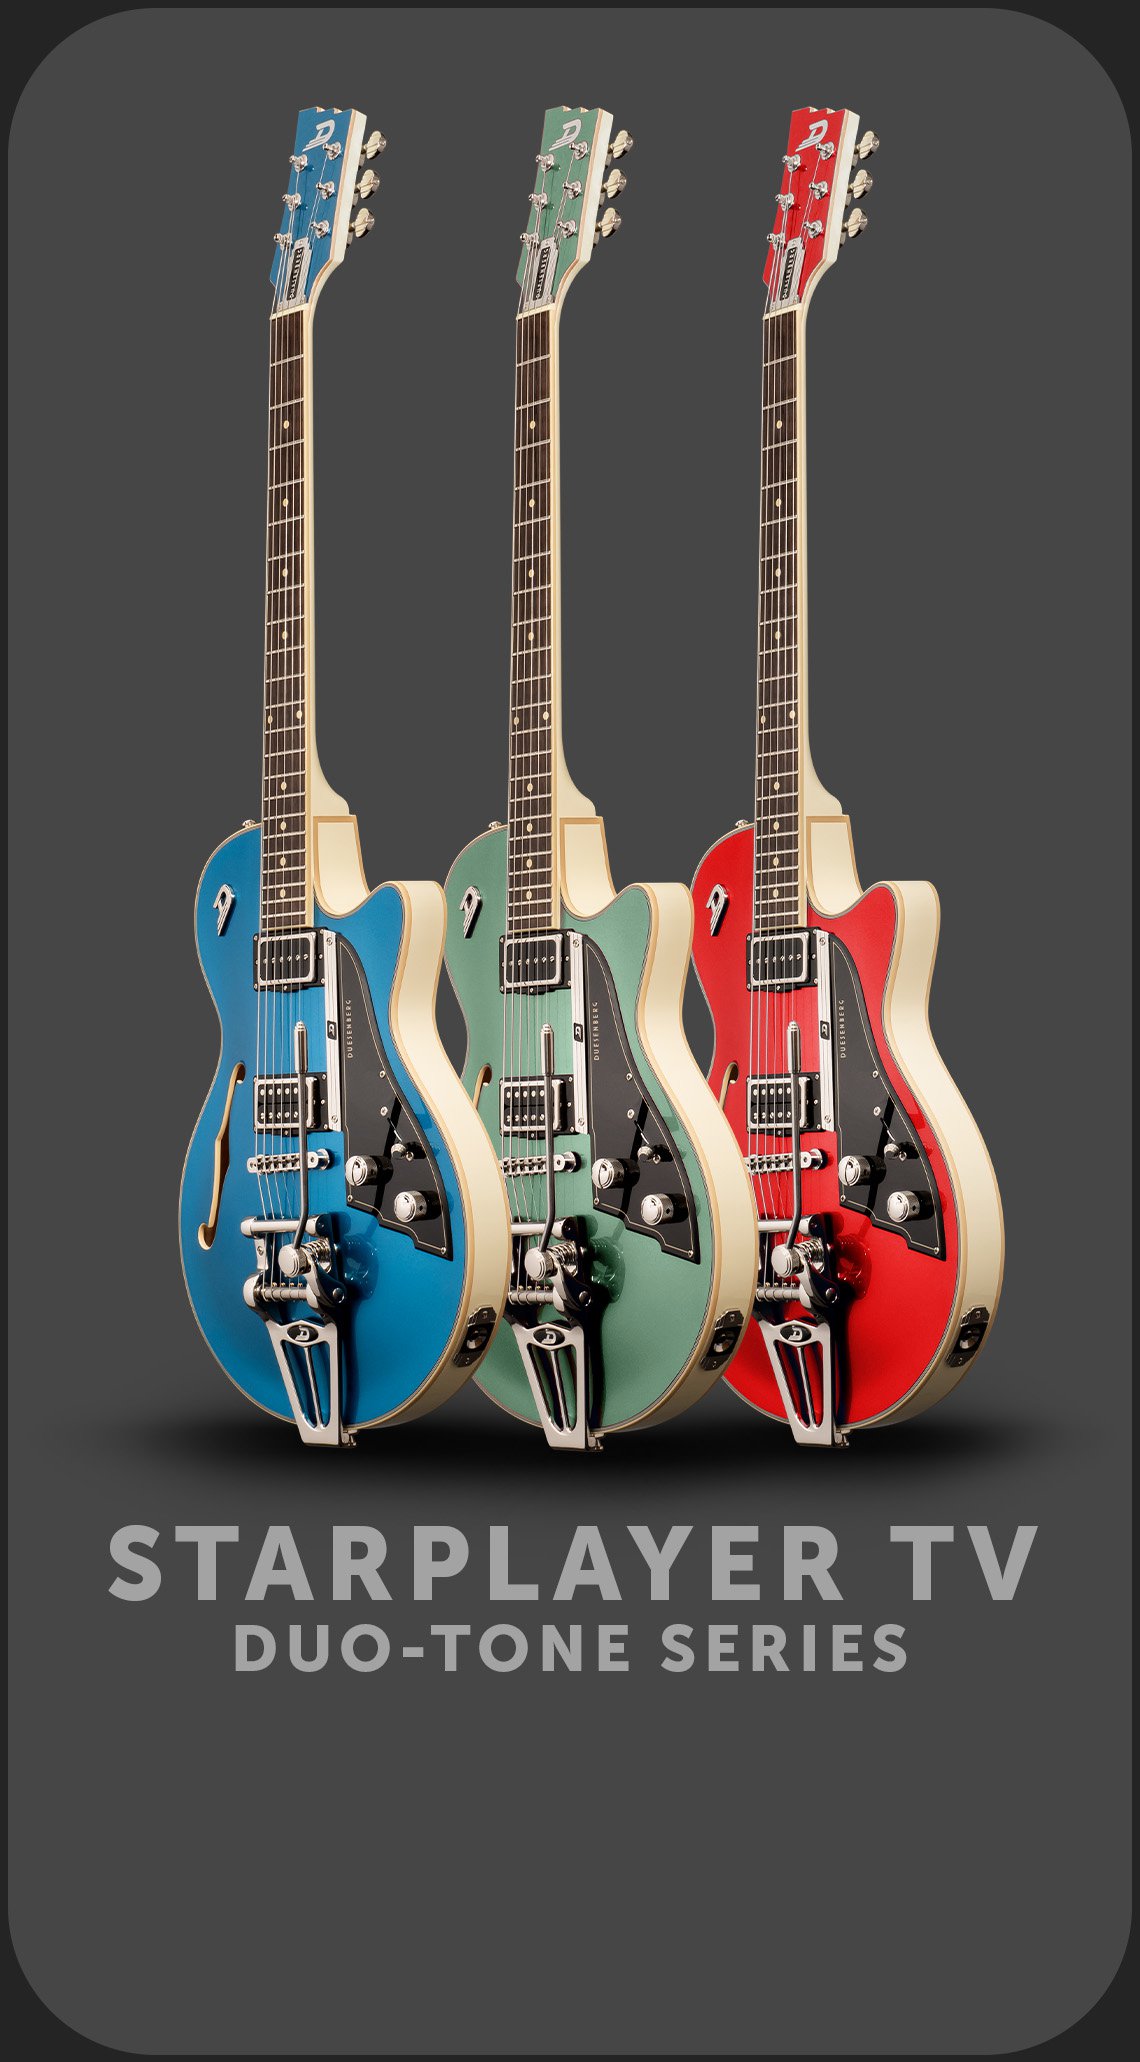 Overview Card for the Duesenberg Starplayer TV Duo-Tone